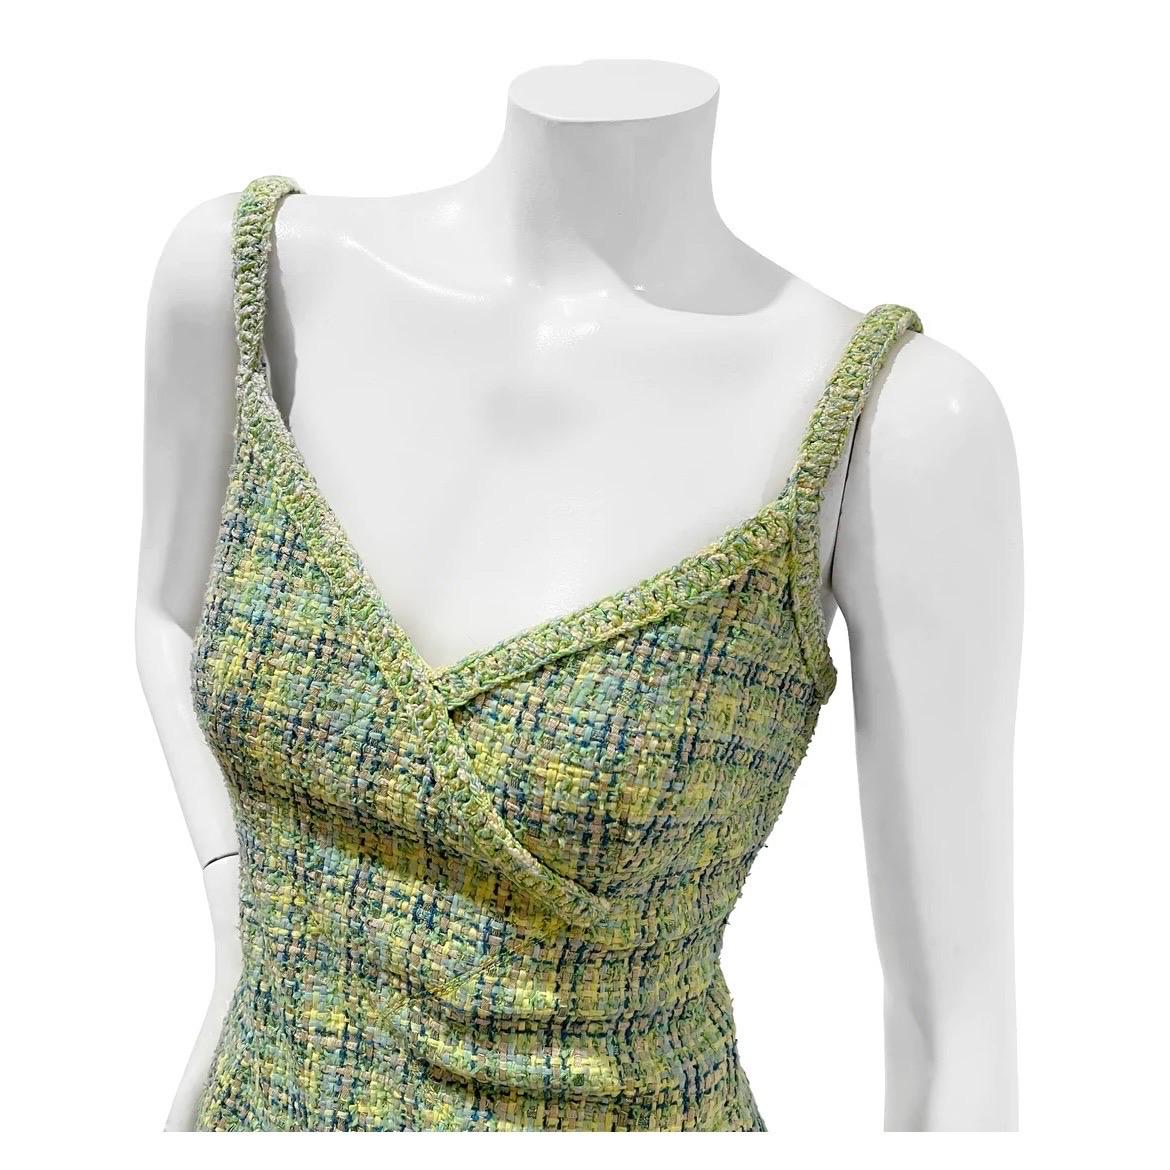 Green Tweed Romper by Chanel 
Spring / Summer 2019
Made in France
Green/yellow
Crochet trim detail
Tweed
Spaghetti straps
Dual diagonal front pockets
Invisible back zip closure
'V' neck
Ruched detailing on bottom of shorts
Single Chanel logo crystal